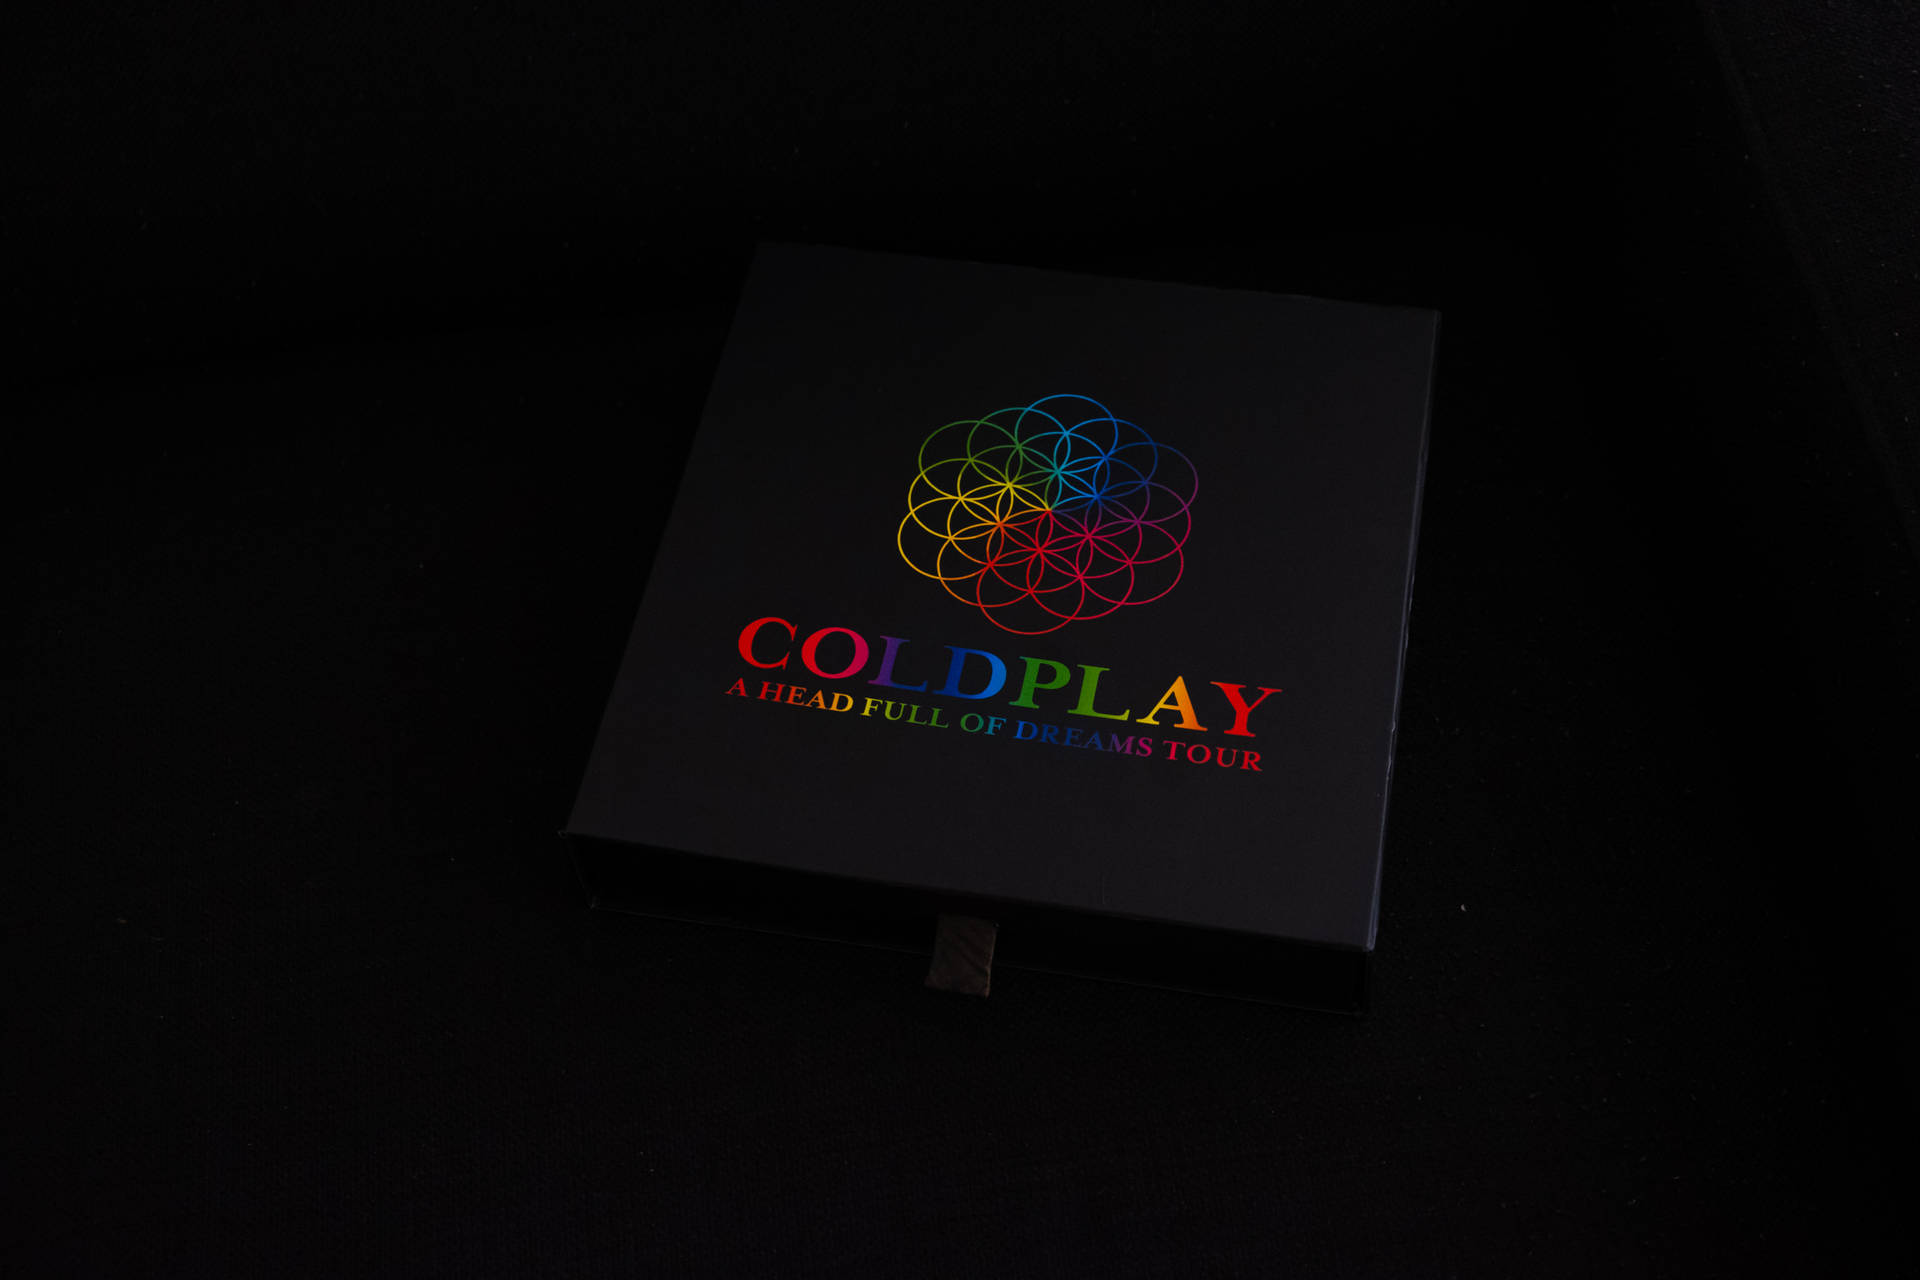 Free Coldplay Wallpaper Downloads, [100+] Coldplay Wallpapers for FREE |  